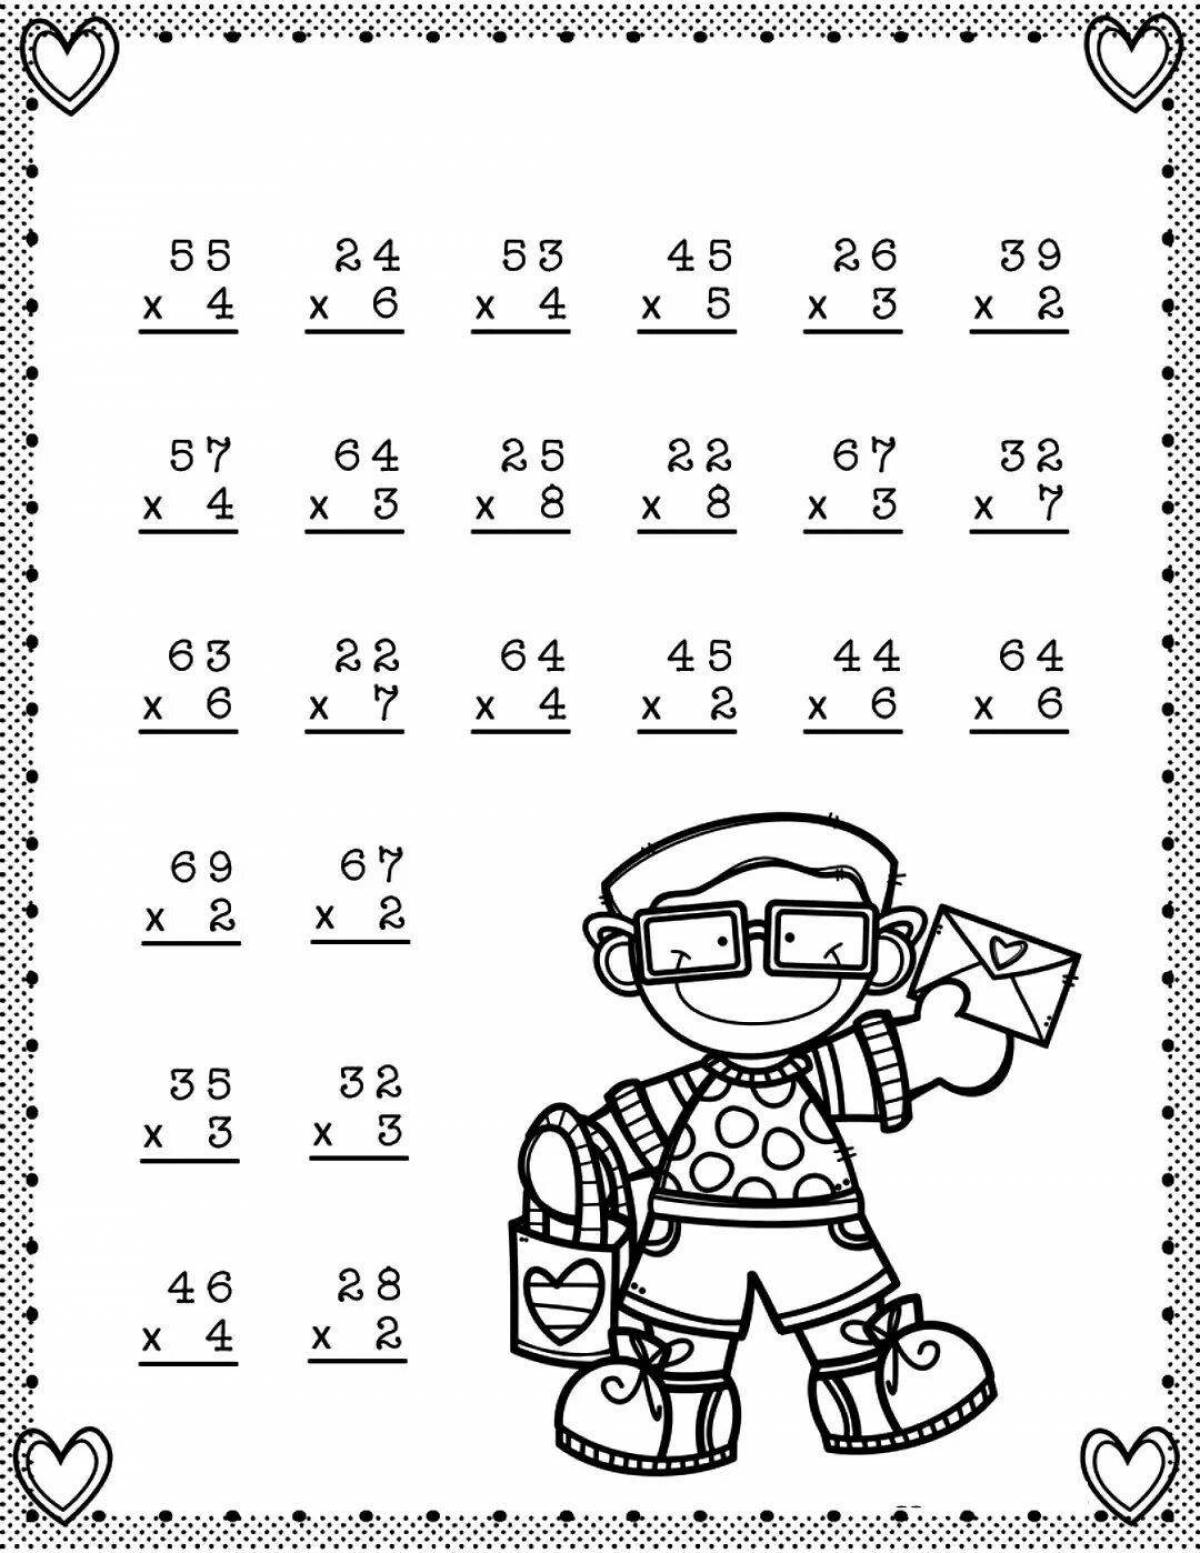 Colorful sparkling multiplication table for 5